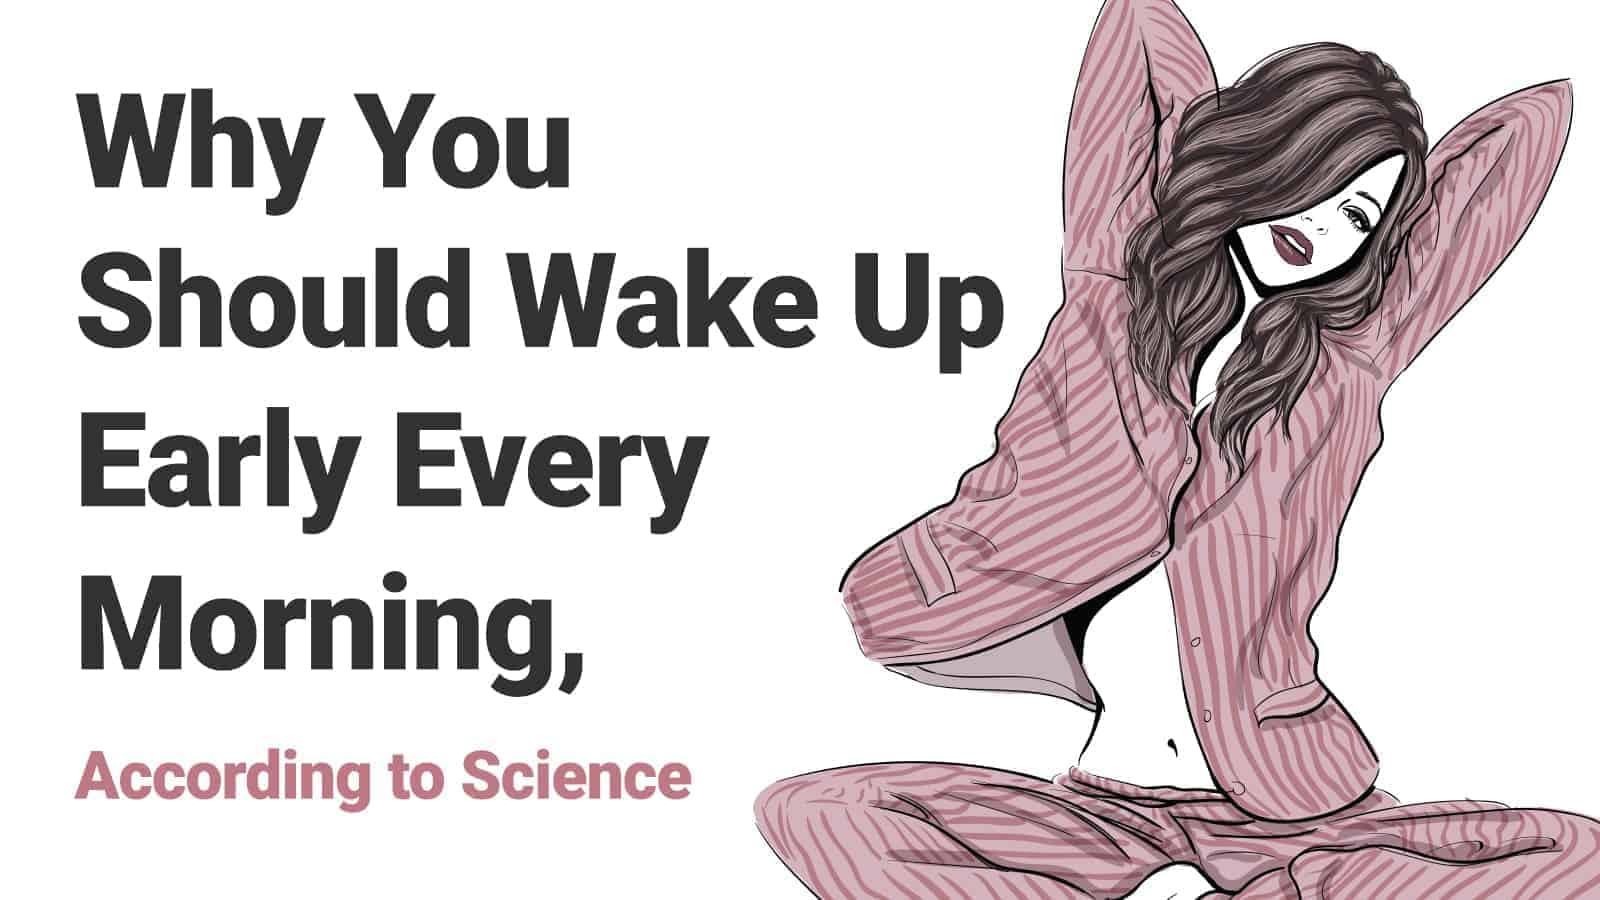 Why You Should Wake Up Early Every Morning, According to Science